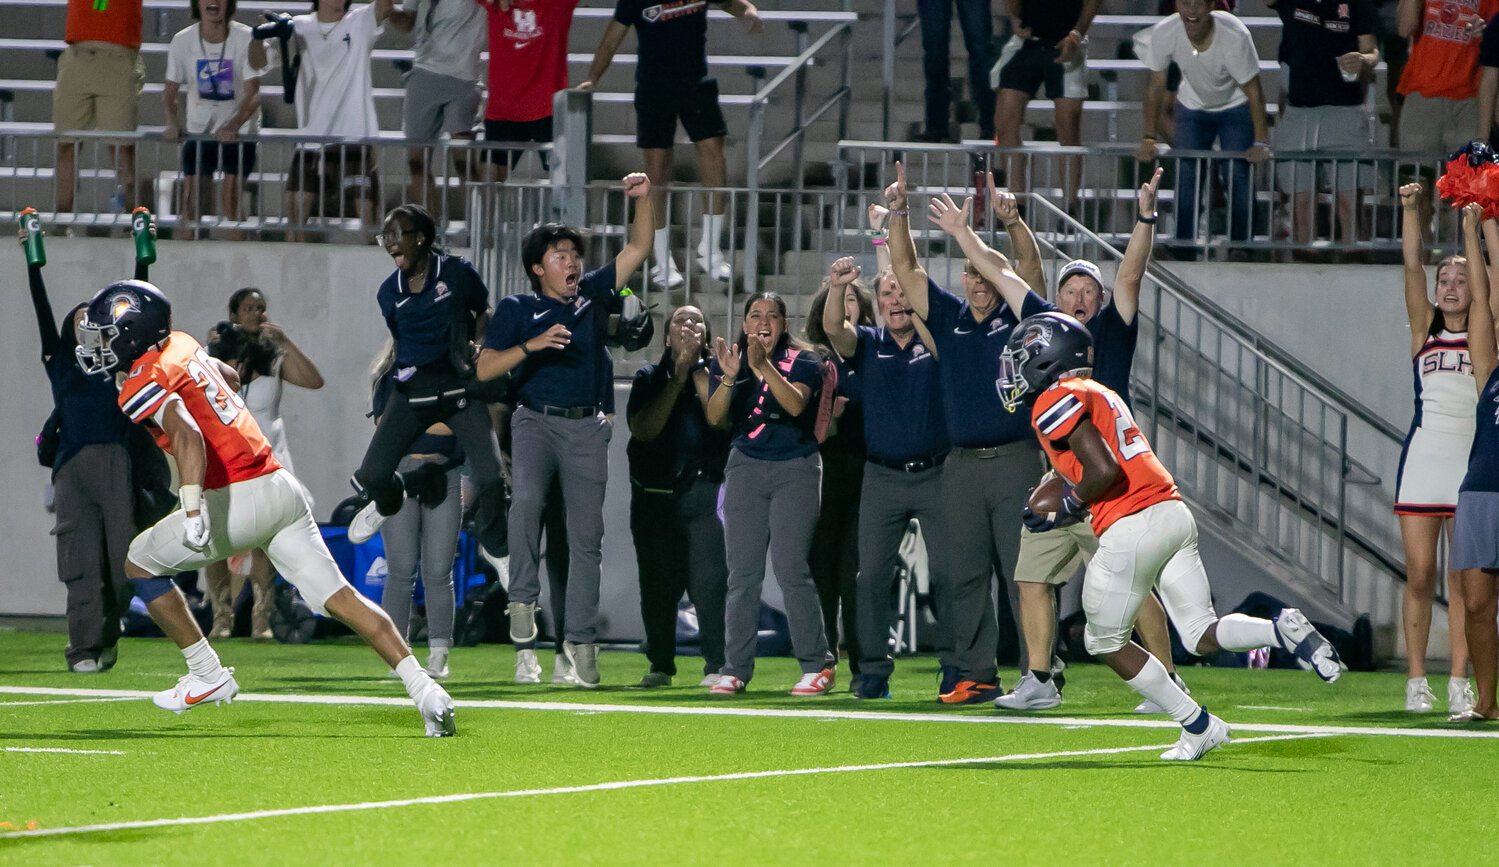 Seven Lakes' sideline celebrates after Keaton Fowler-Smith intercepted a pass in overtime during Thursday's game between Seven Lakes and Memorial at Legacy Stadium.